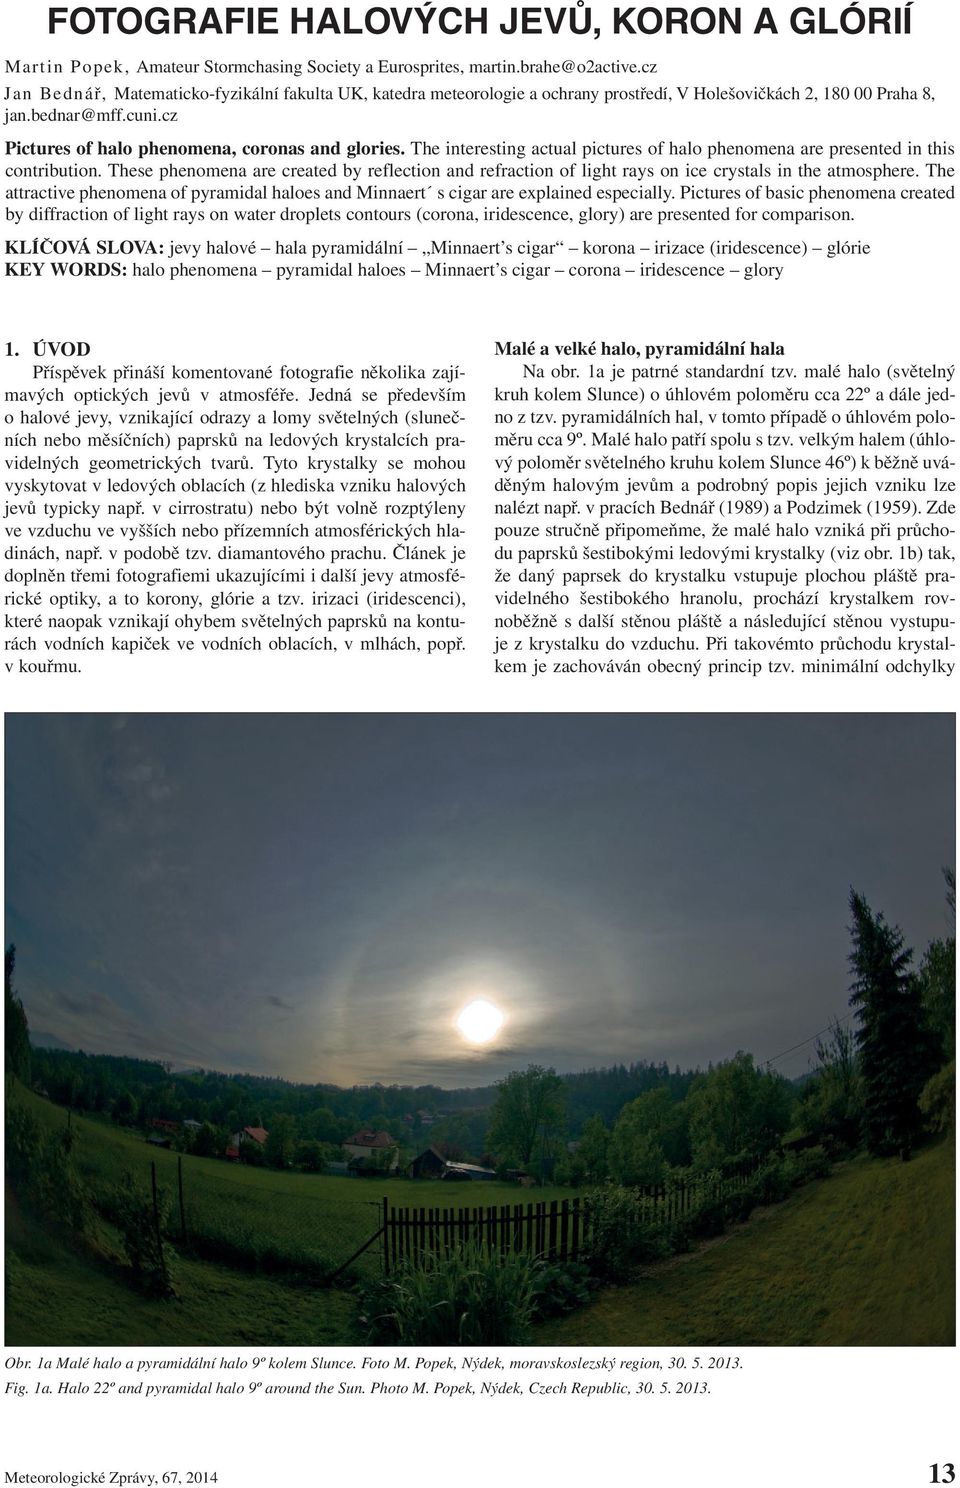 The interesting actual pictures of halo phenomena are presented in this contribution. These phenomena are created by reflection and refraction of light rays on ice crystals in the atmosphere.